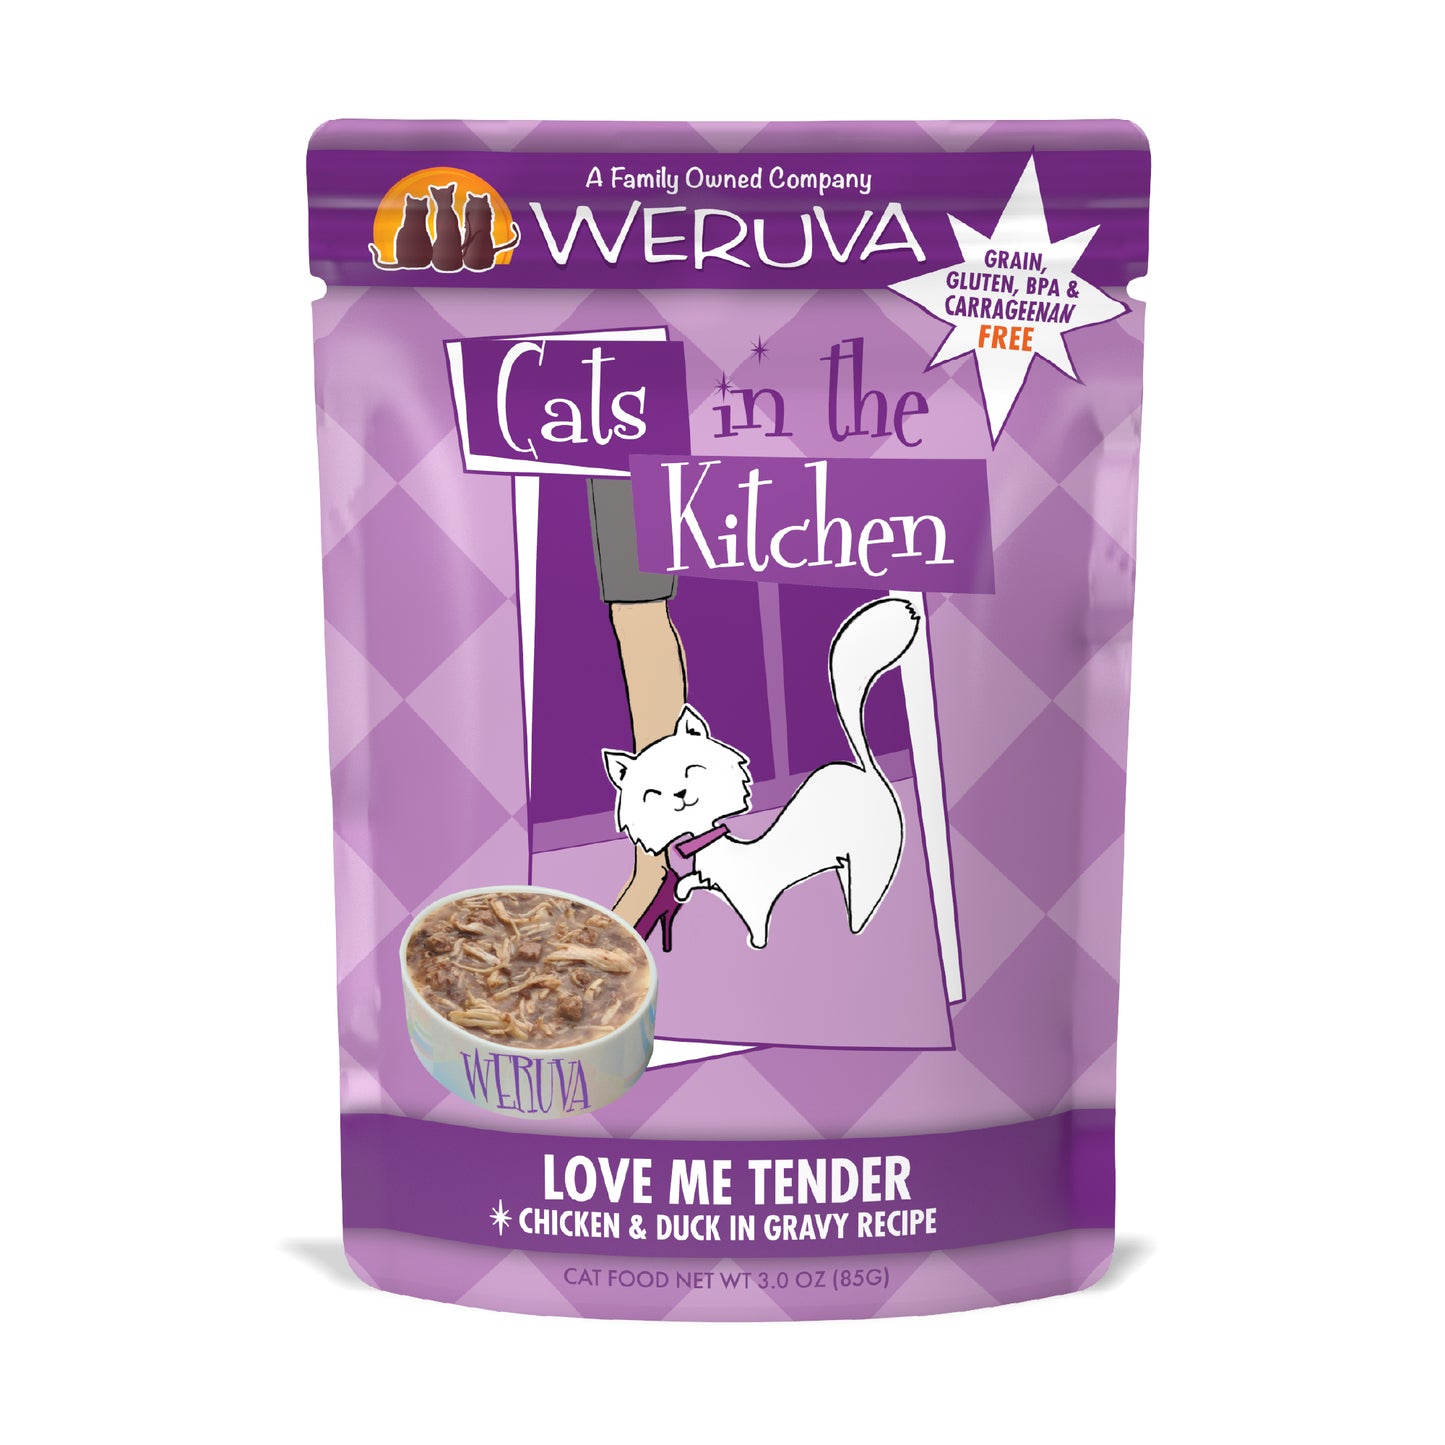 Weruva Cats in the Kitchen 3oz Pouch Cat Food Love Me Tender